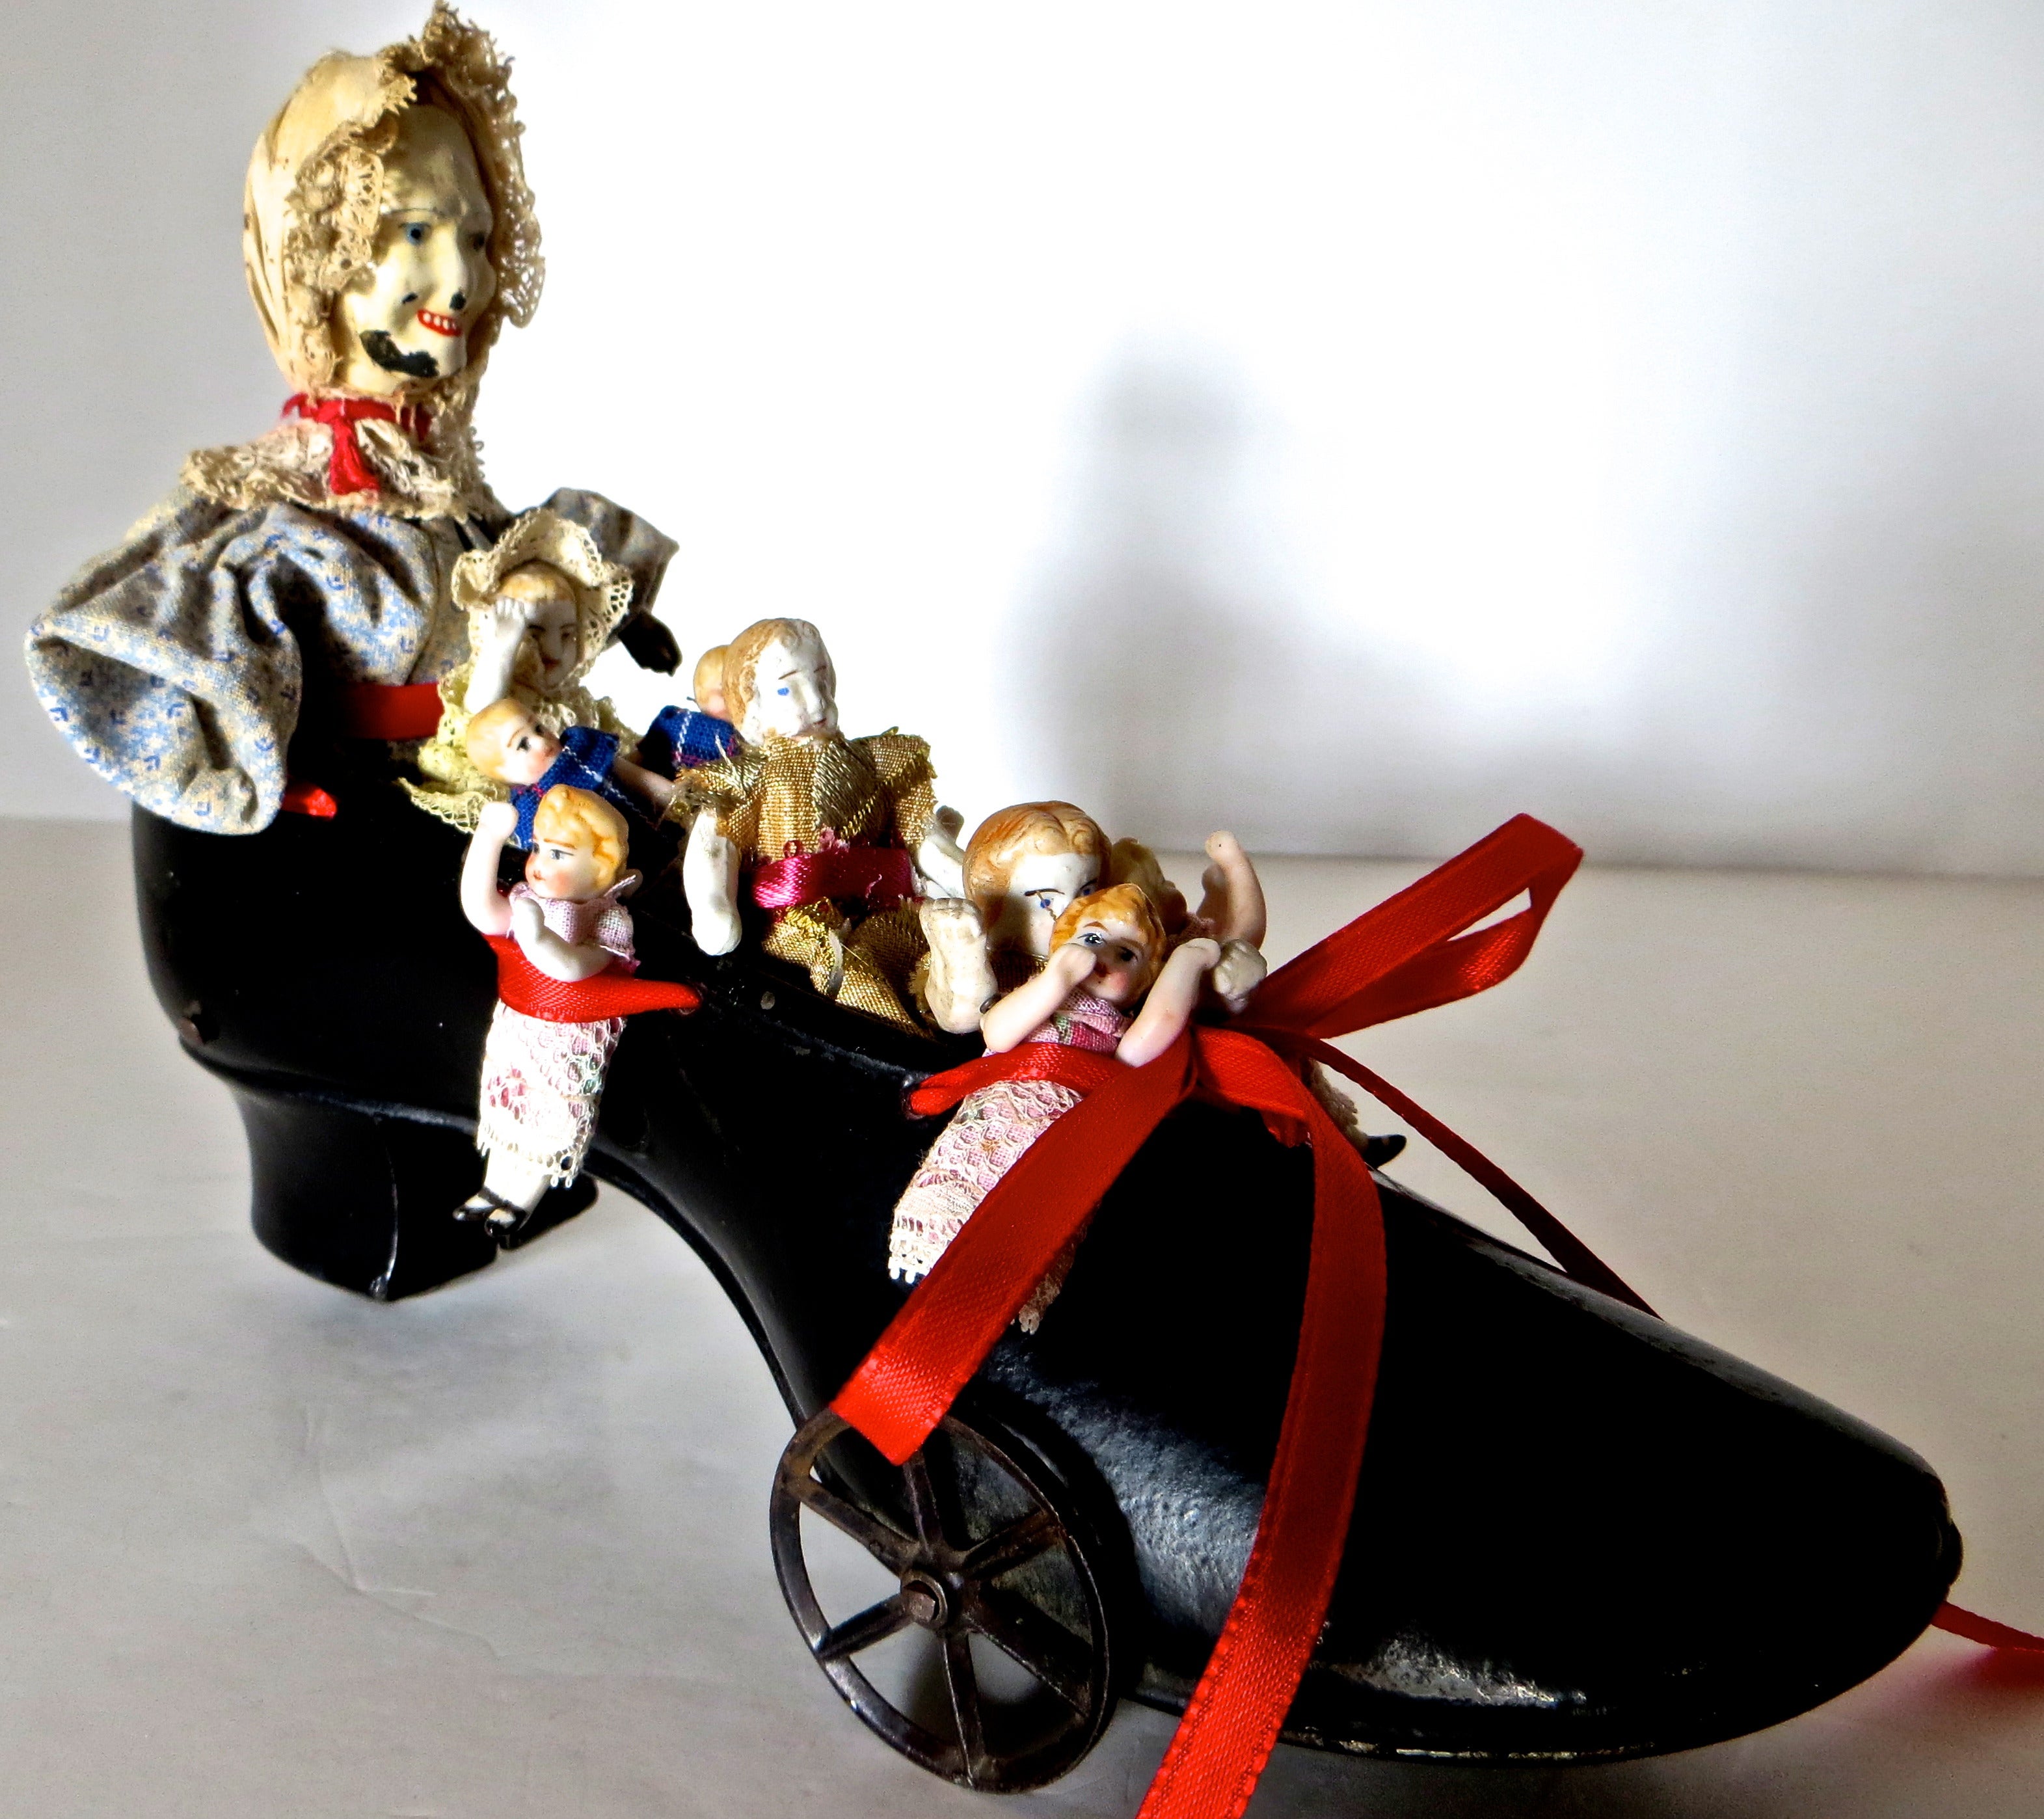 "Old Woman In The Shoe"  Pull Toy  Manufactured by Ive's, circa 1890